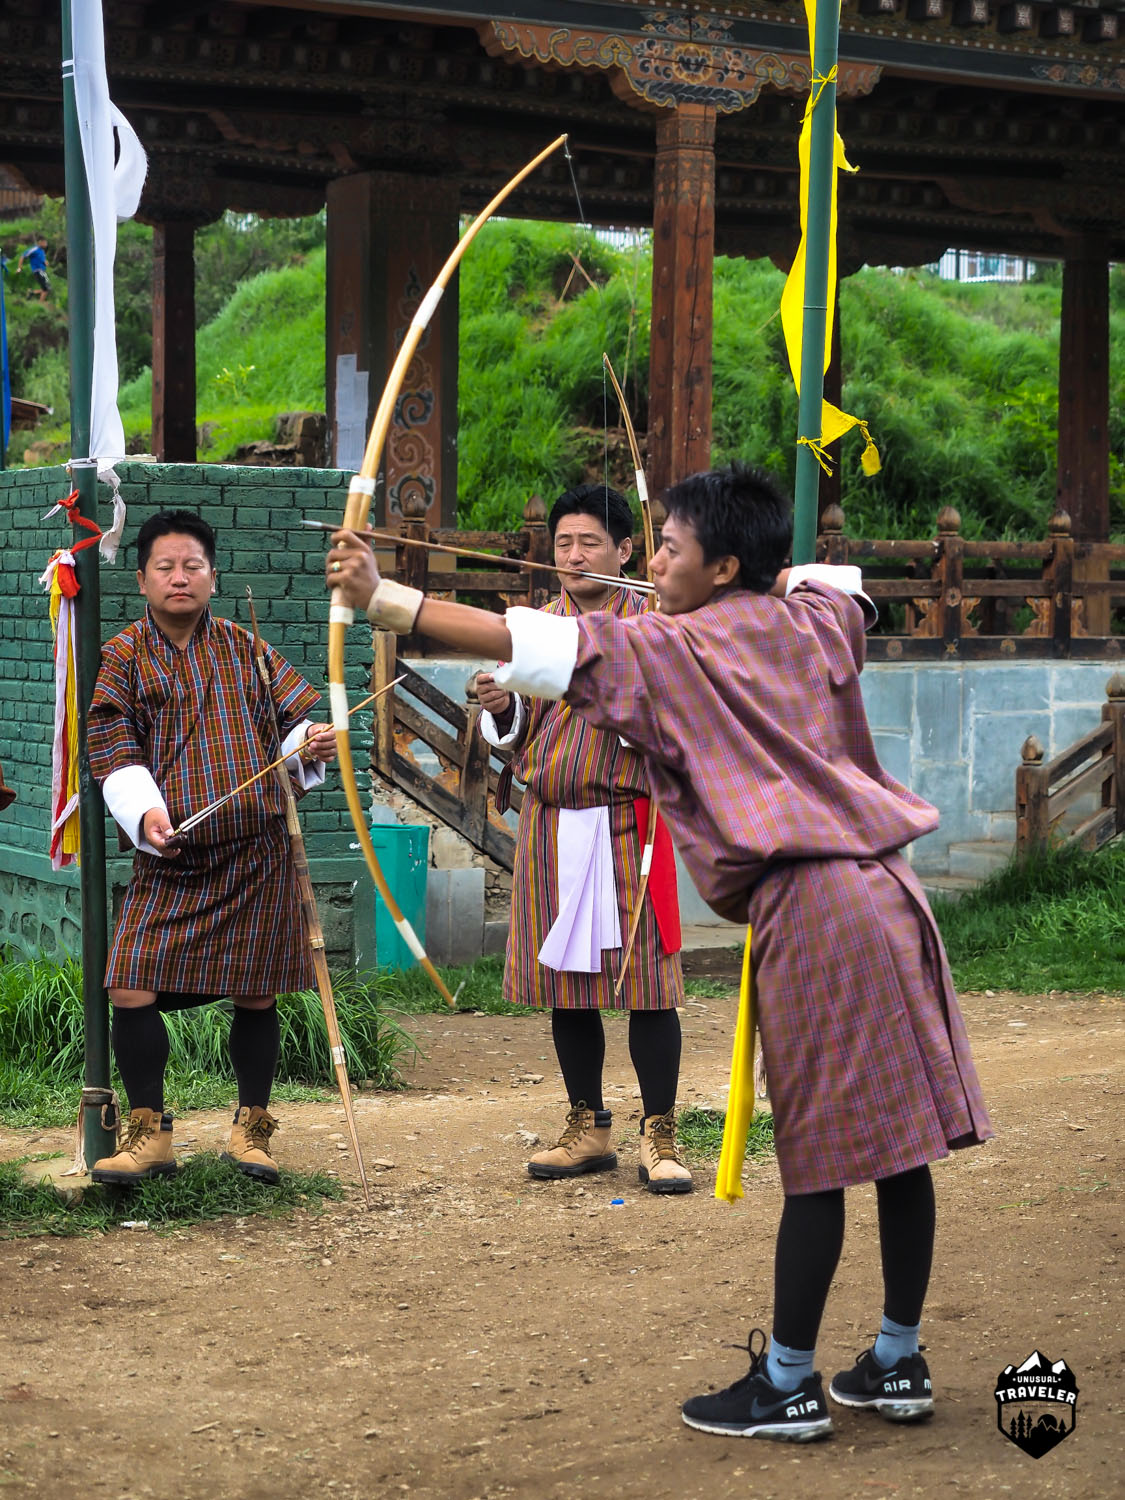 Archery is the national sport of Bhutan, and still widely played around the country.